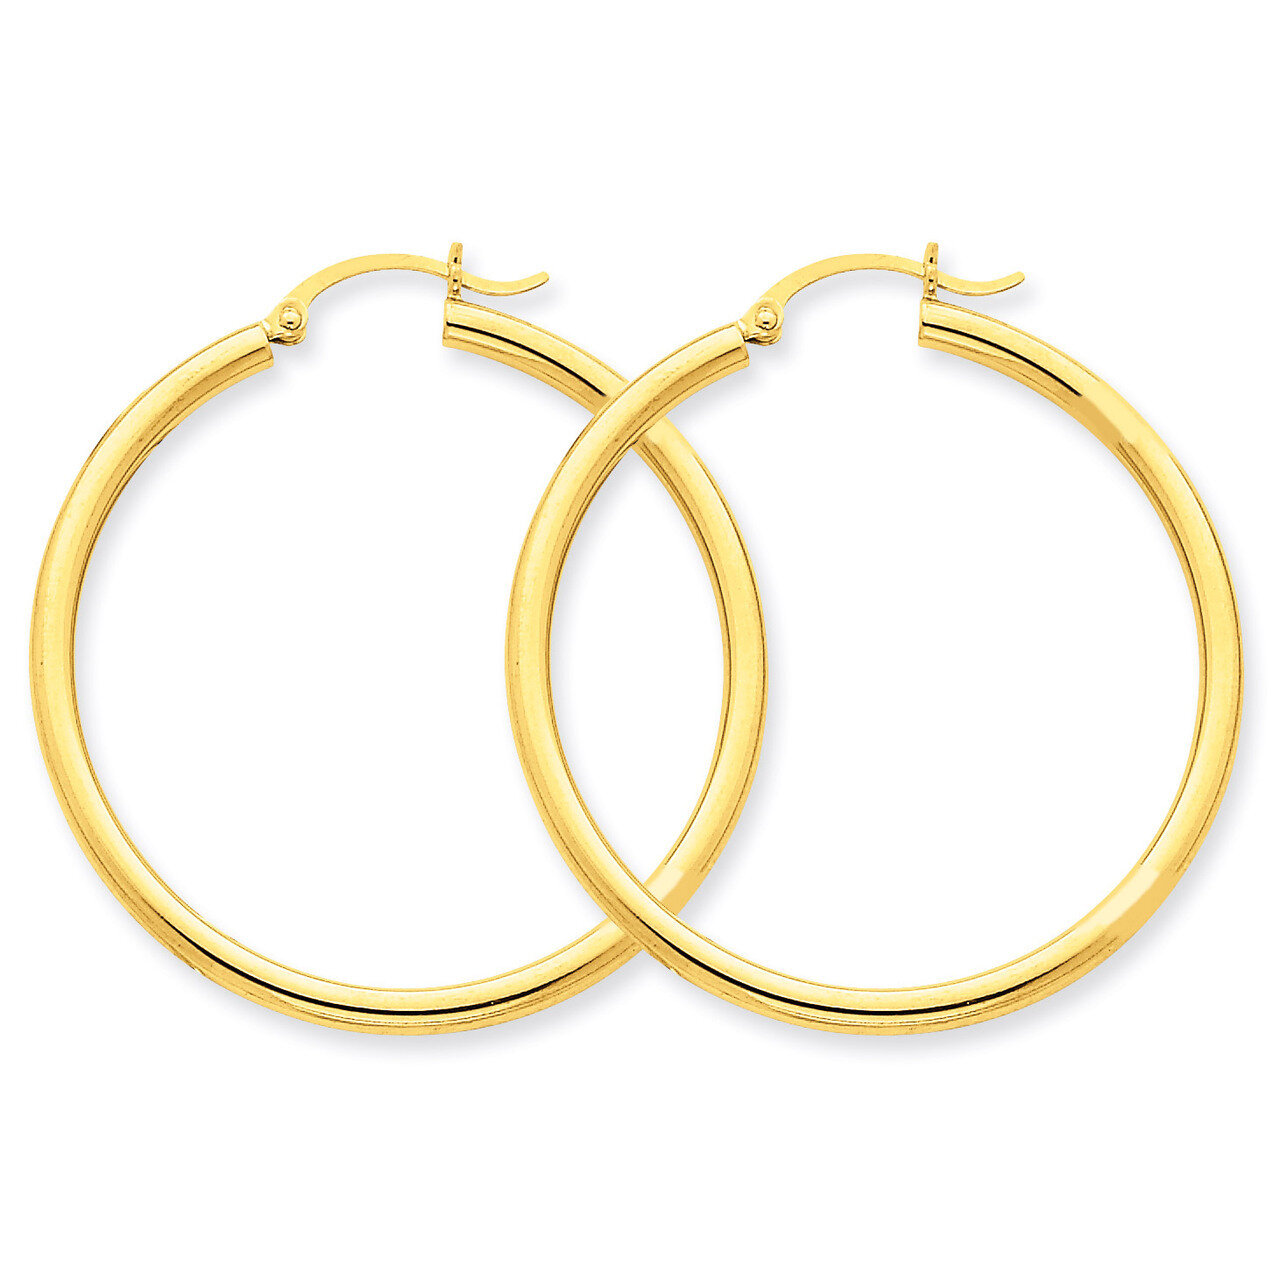 Polished 2.5mm Round Hoop Earrings 10k Gold 10T925